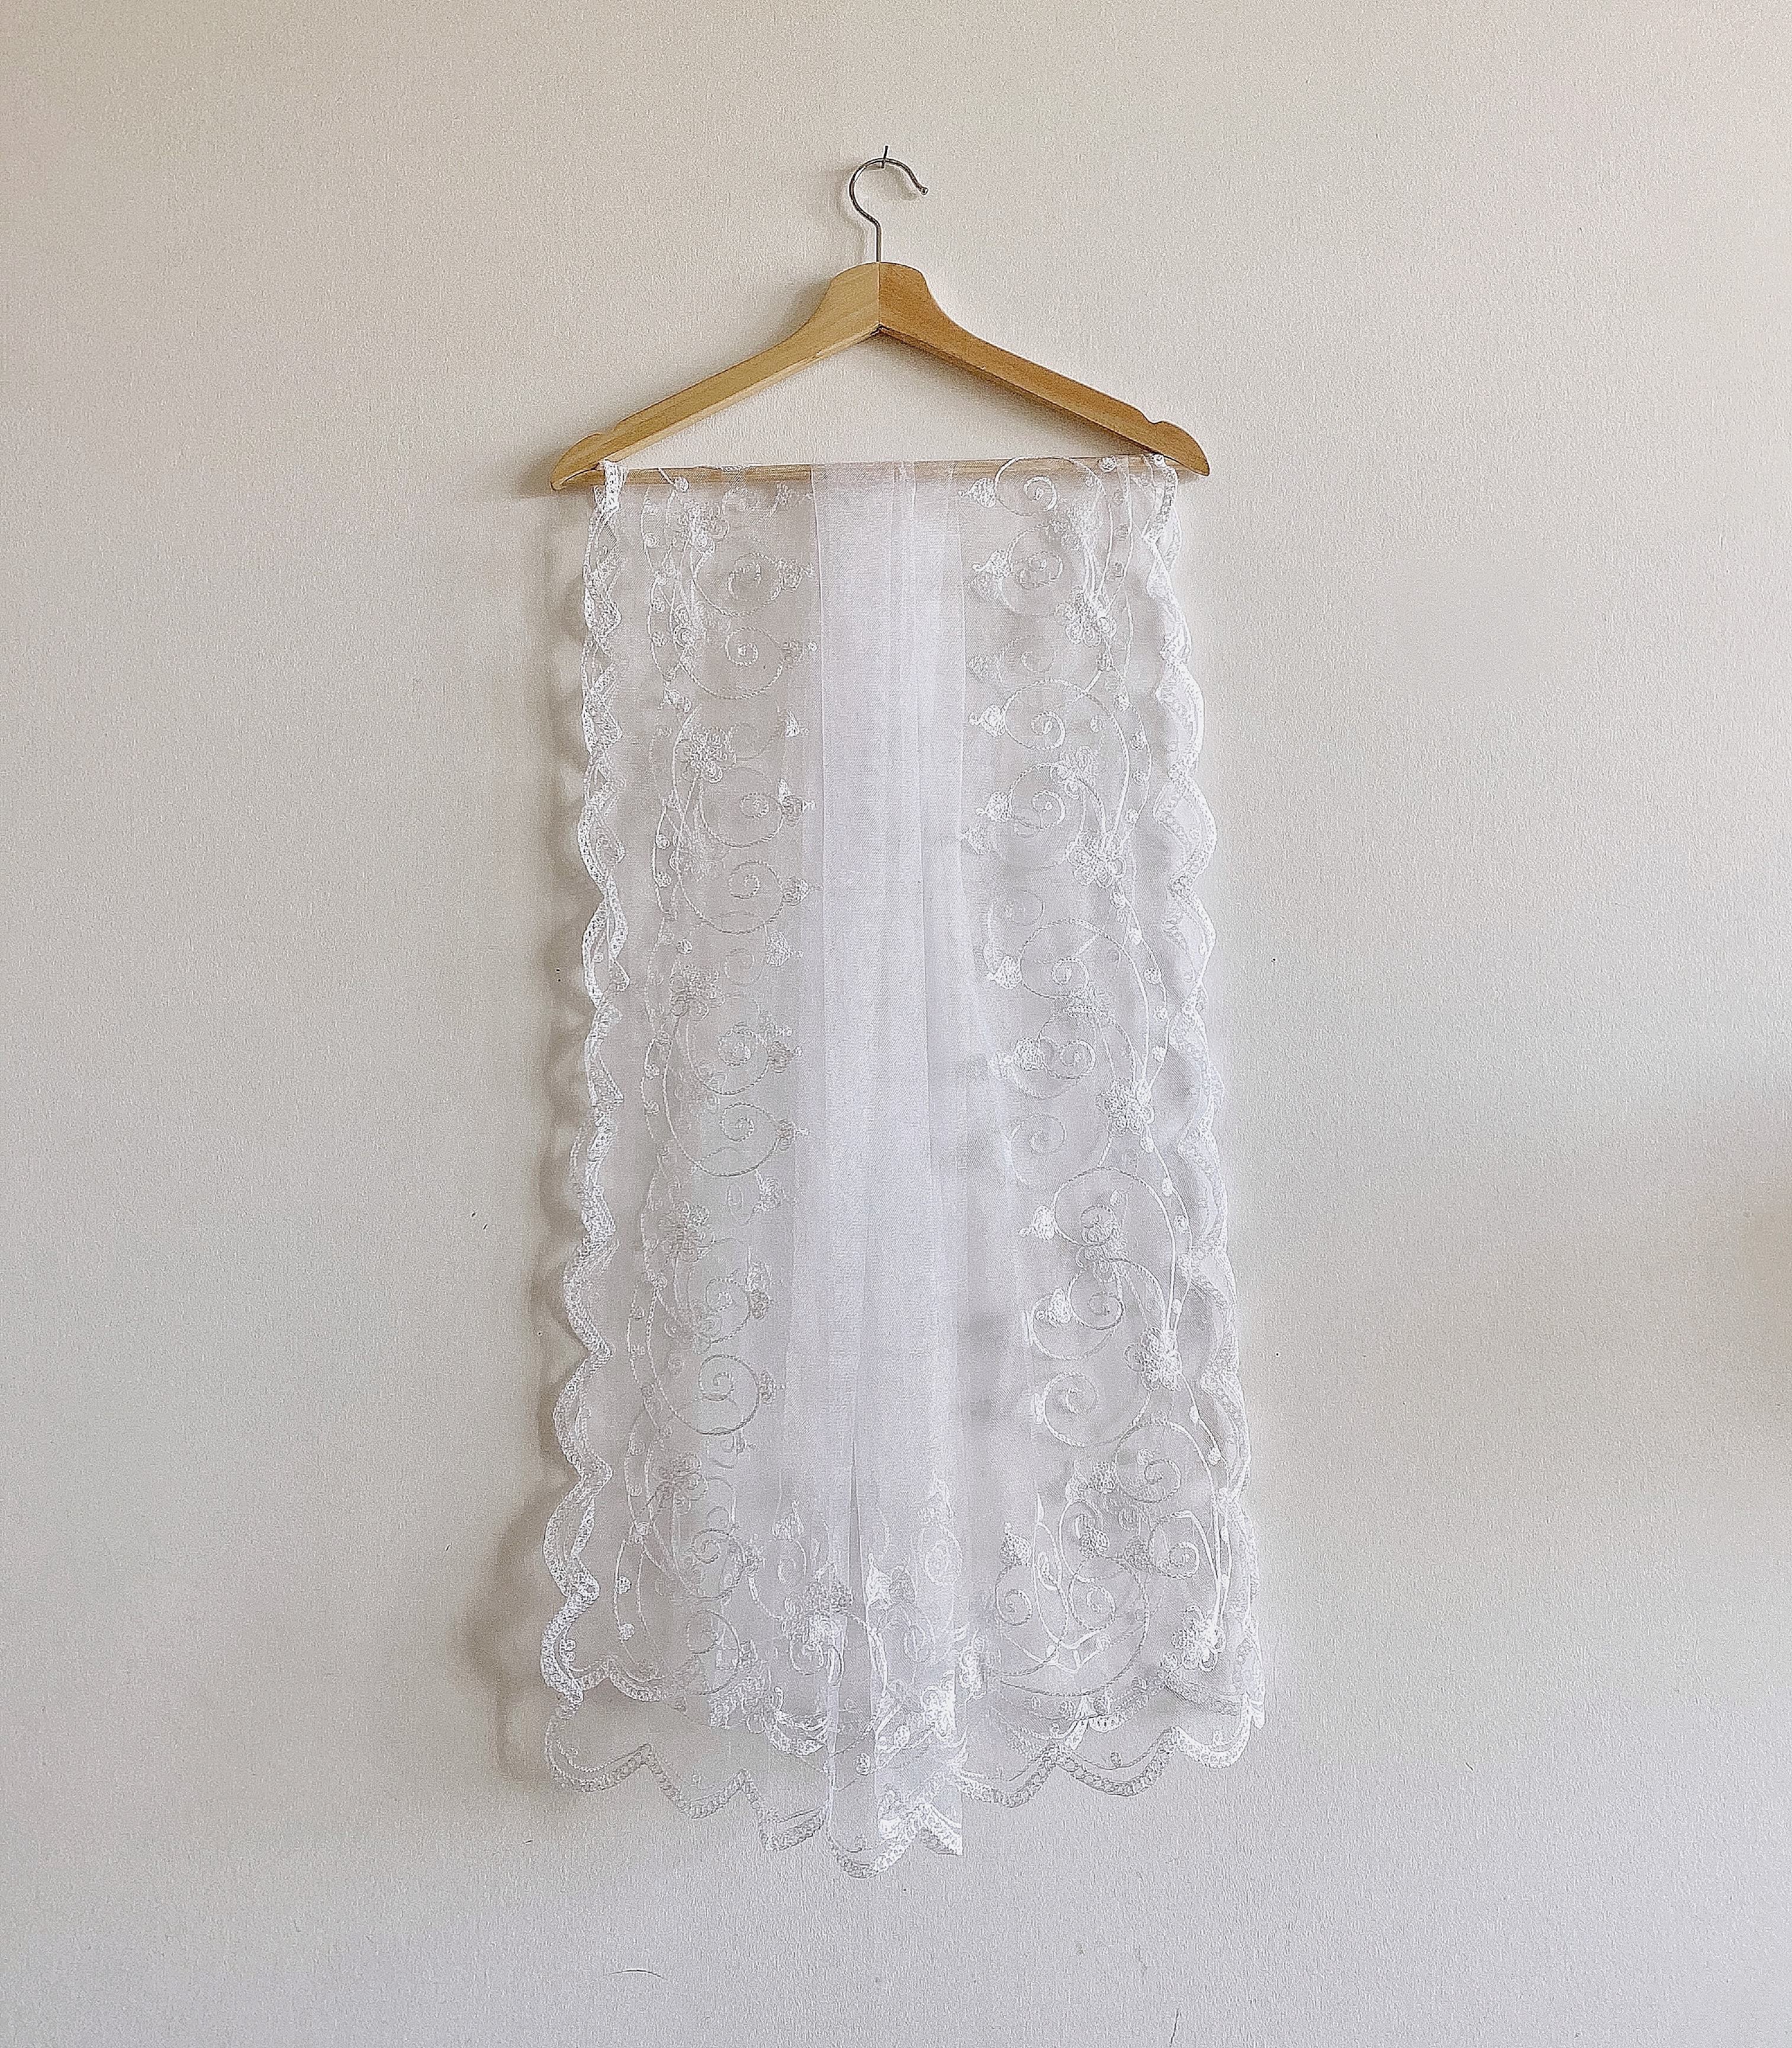 The Embroidered Filipino Unity Veil - The Wedding Library